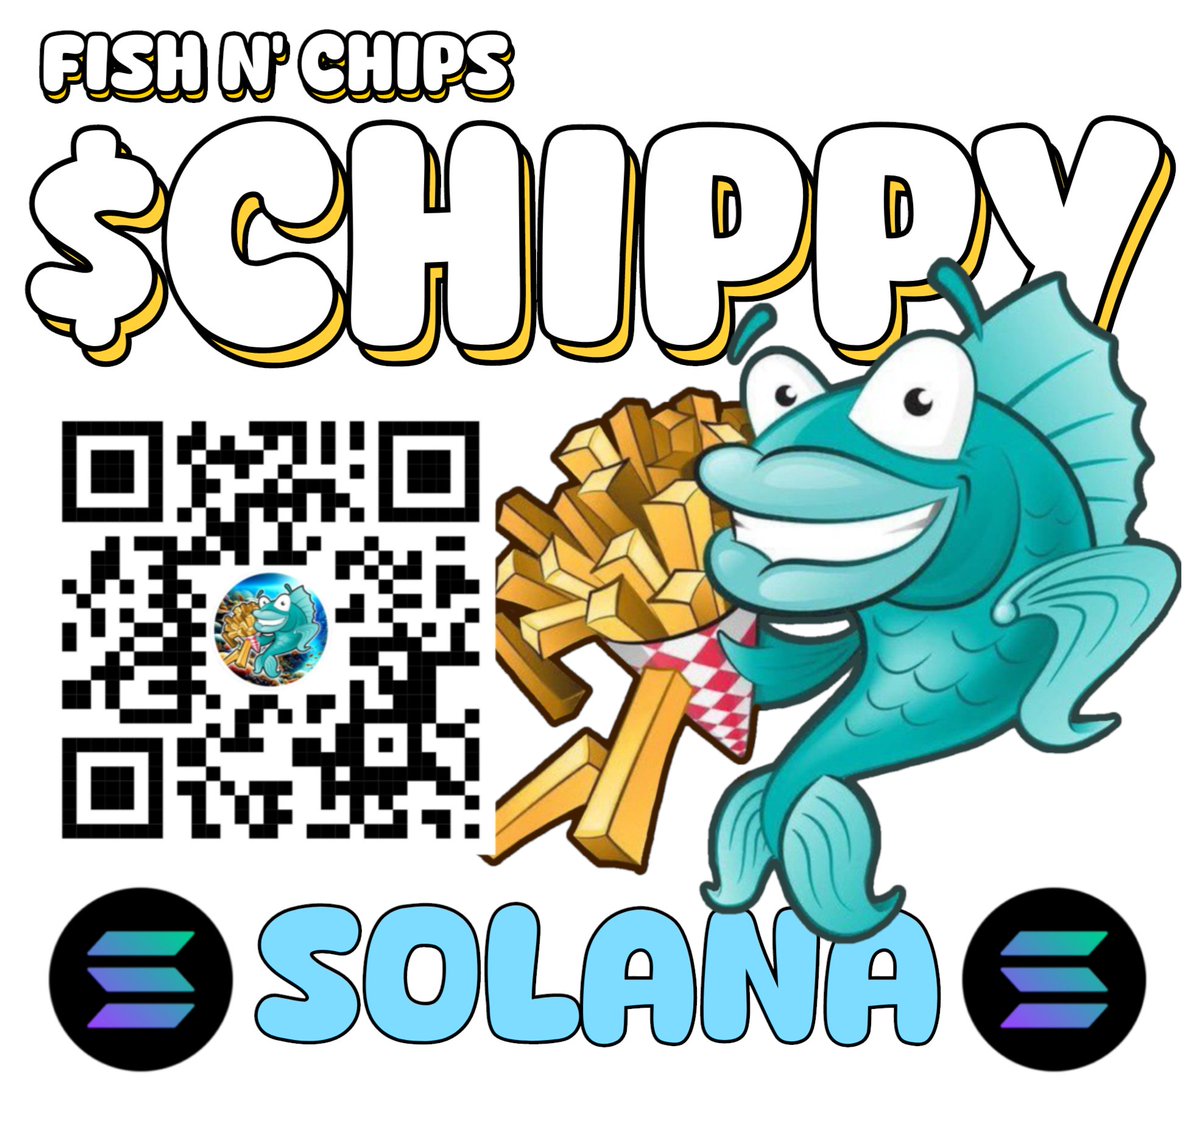 🚨GIVEAWAY🚨

When we hit 1200 members in our telegram group @MartiniGuyYT is giving away 10,000 $CHIPPY ($125) to one lucky member 🤞

Join now 👉 t.me/fishnchipssol